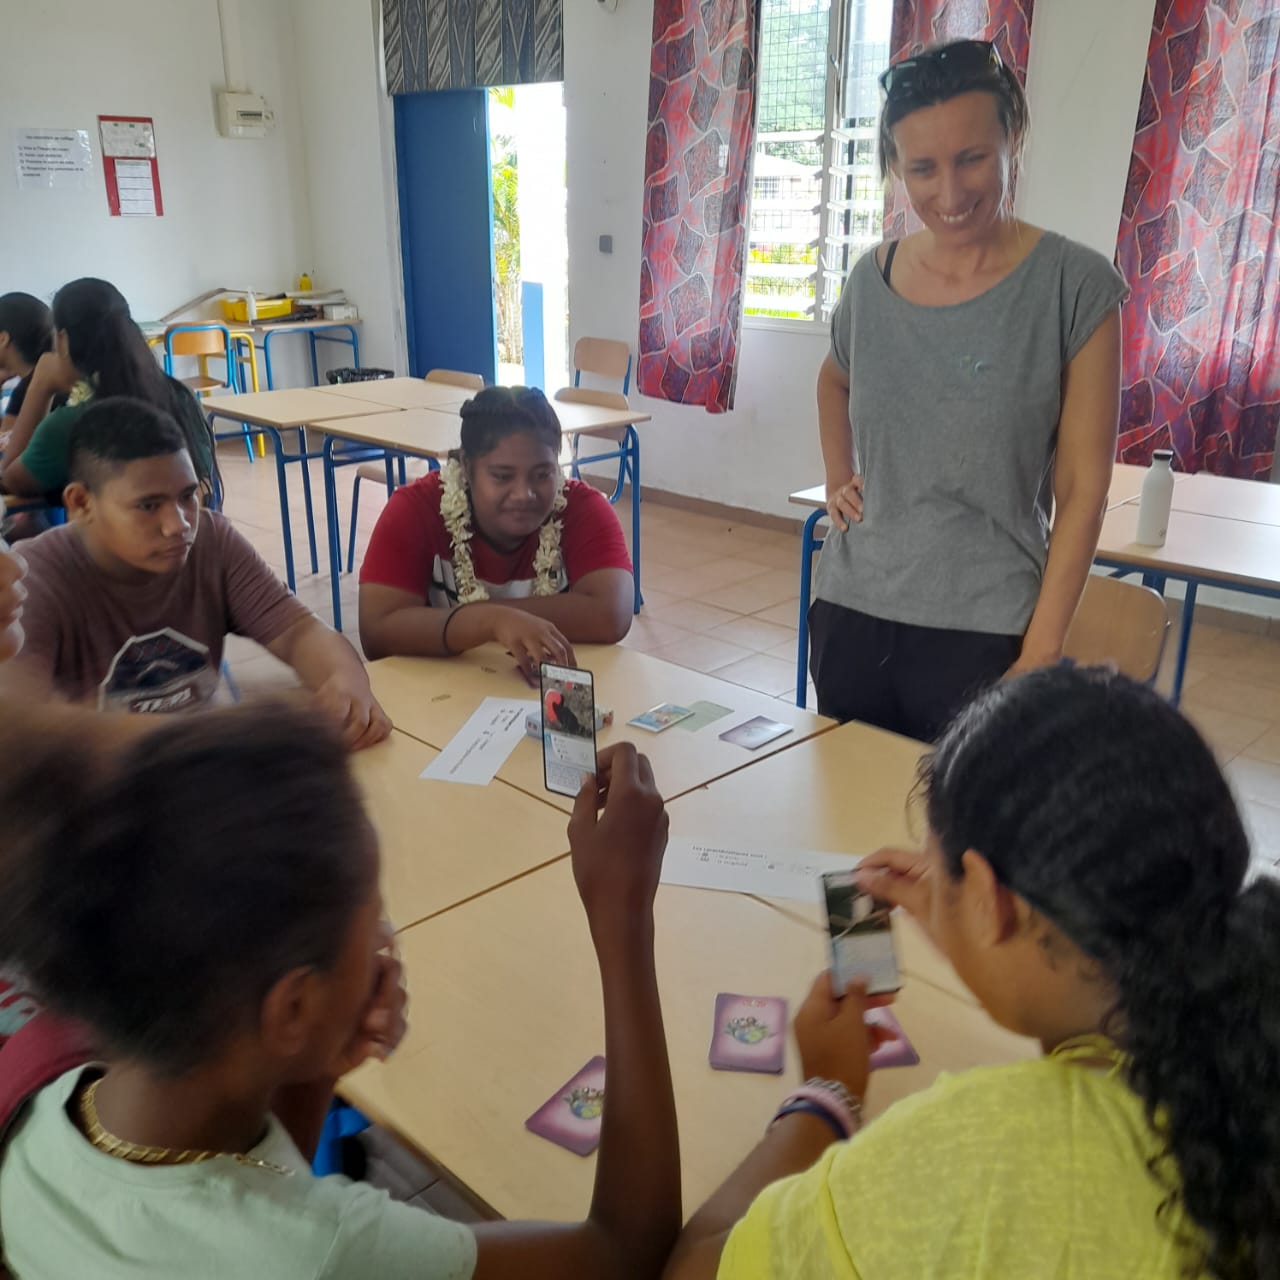 Workshop using the educational kit "Water" by the Territorial Service of the Environment of Wallis and Futuna